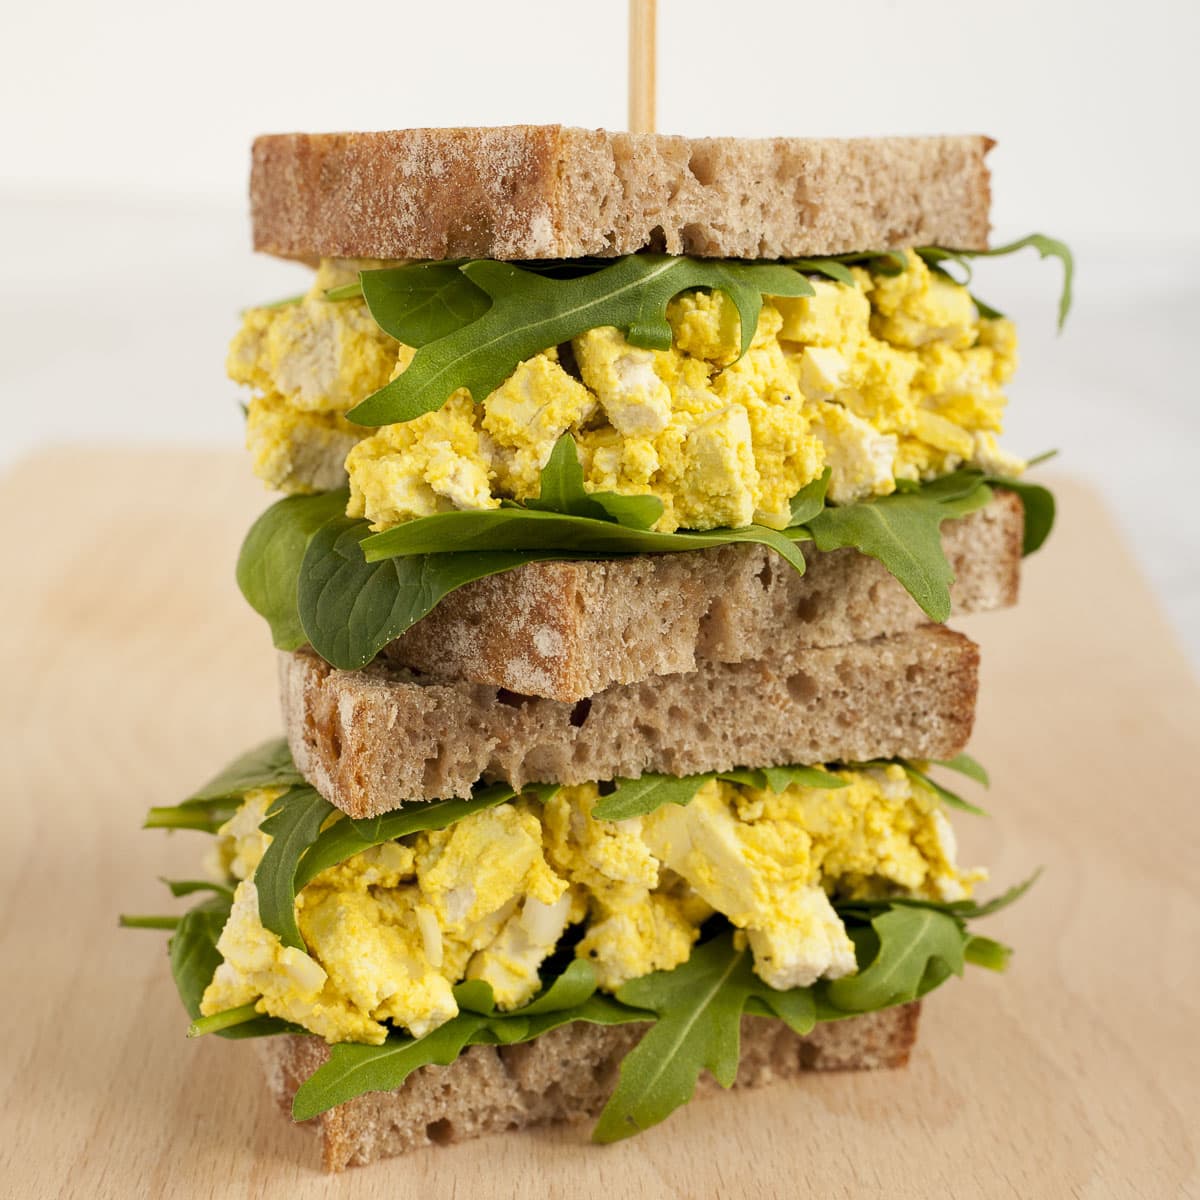 <p>The best vegan egg substitute that mimics the unique texture of eggs is definitely tofu! Boiled eggs have a very similar spongy texture to firm tofu which makes this vegan egg salad so close to the original. There is really nothing else out there that has such a spongy texture.</p><p>Get the recipe from My Pure Plants: <a href="https://mypureplants.com/vegan-egg-salad-tofu/">vegan egg salad</a></p>